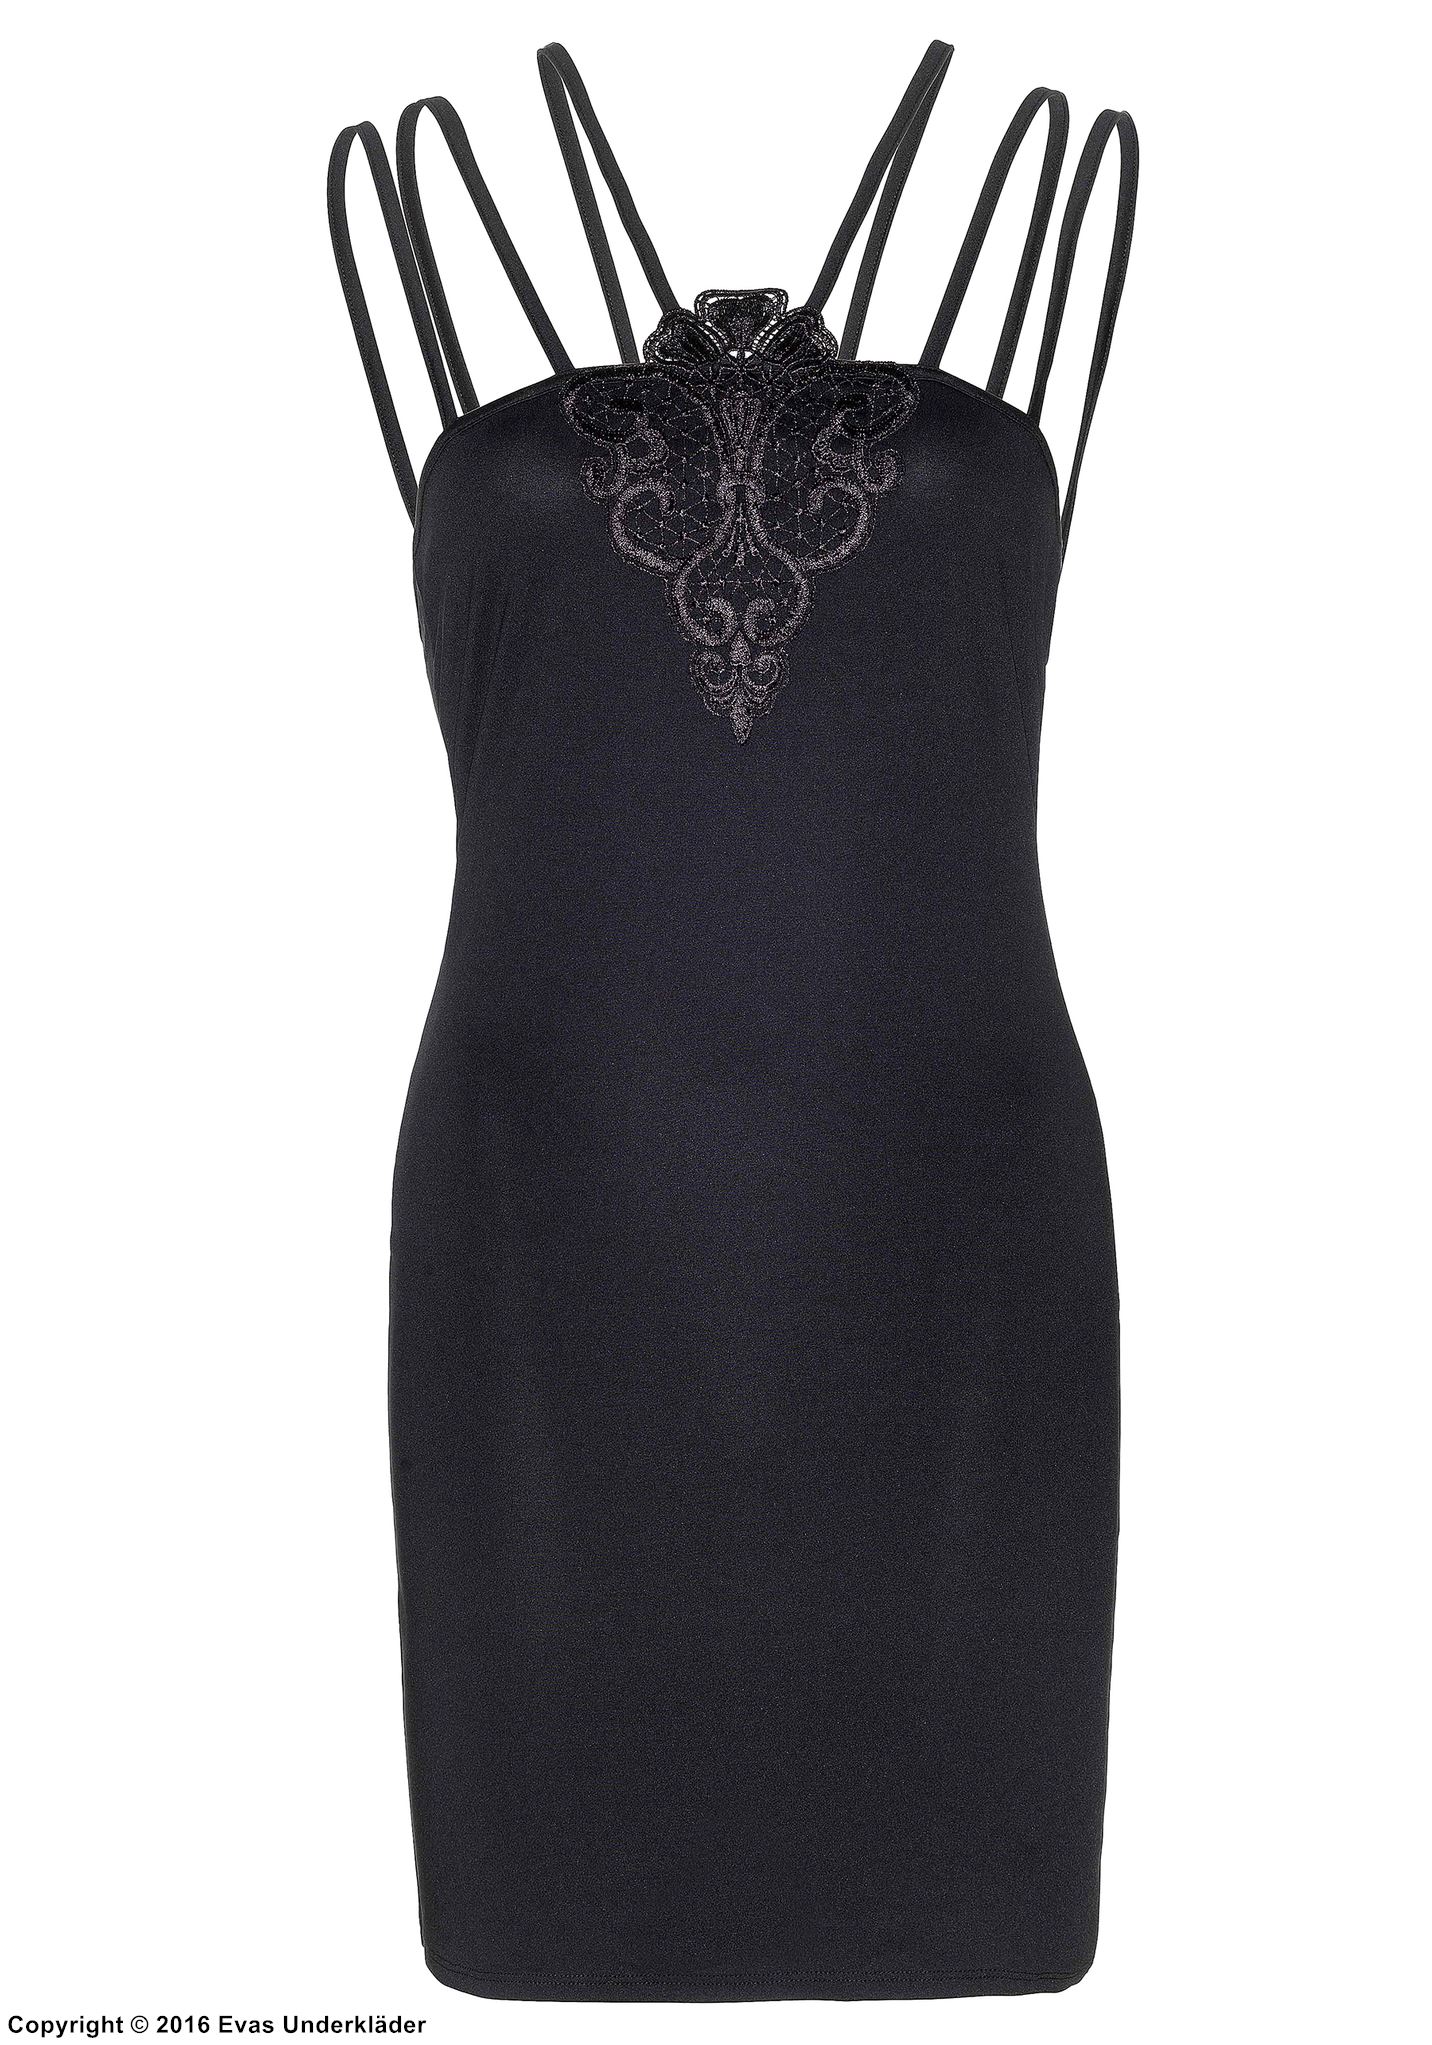 Mini dress, thin shoulder straps, lace embroidery